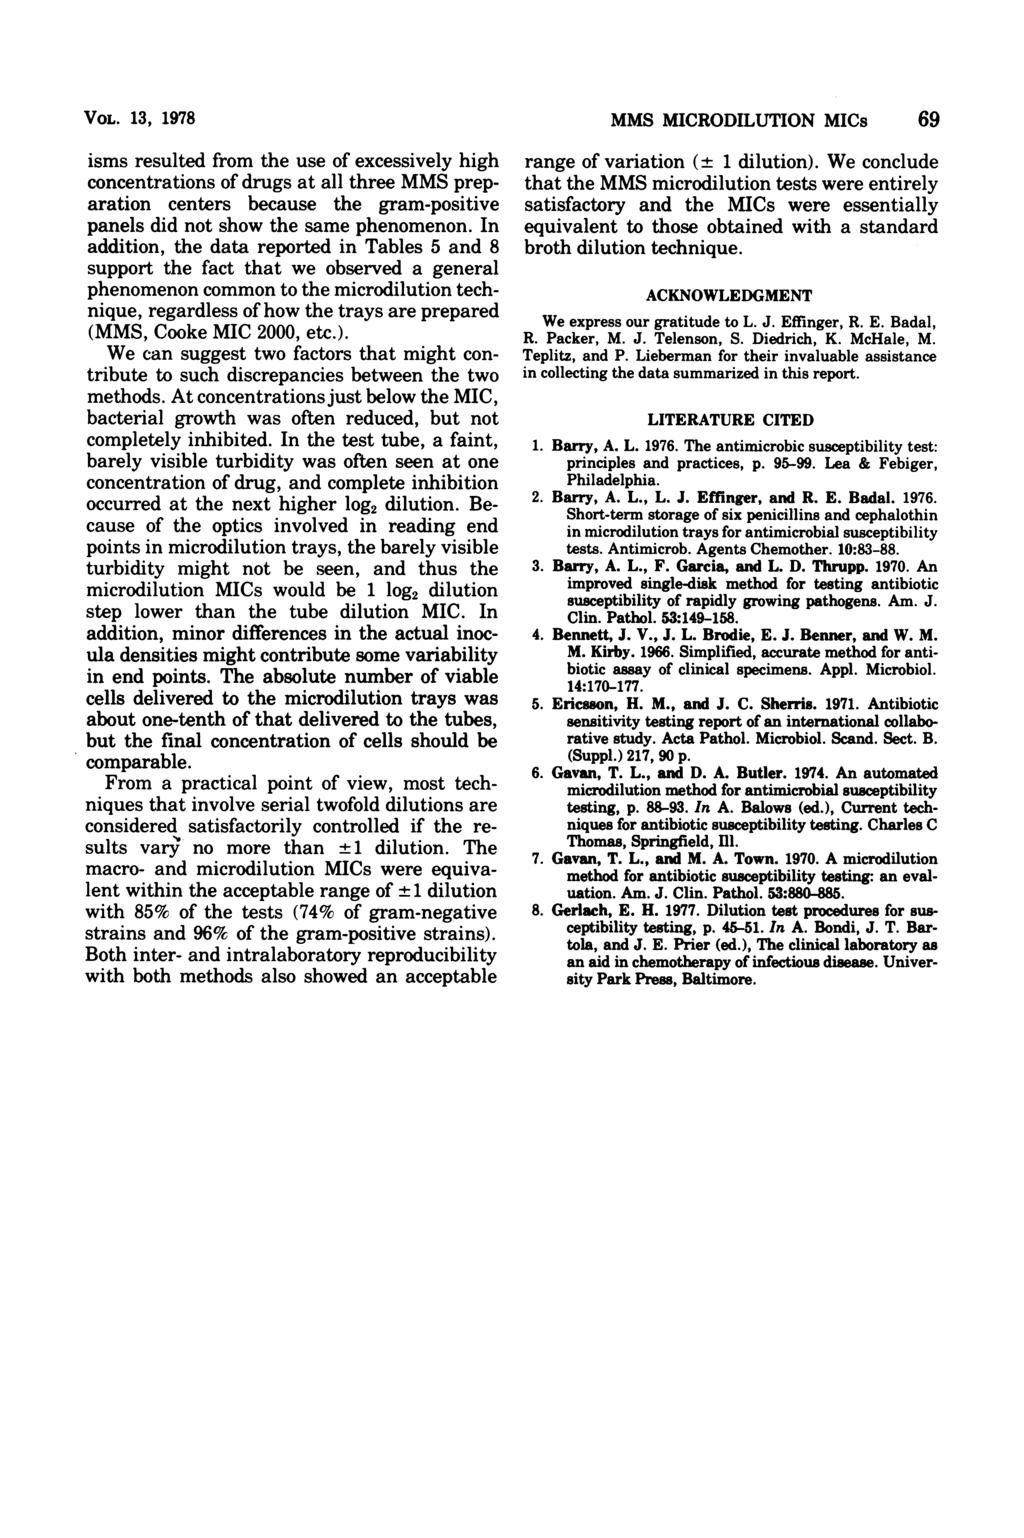 VOL. 13, 1978 isms resulted from the use of excessively high concentrations of drugs at all three MMS preparation centers because the gram-positive panels did not show the same phenomenon.